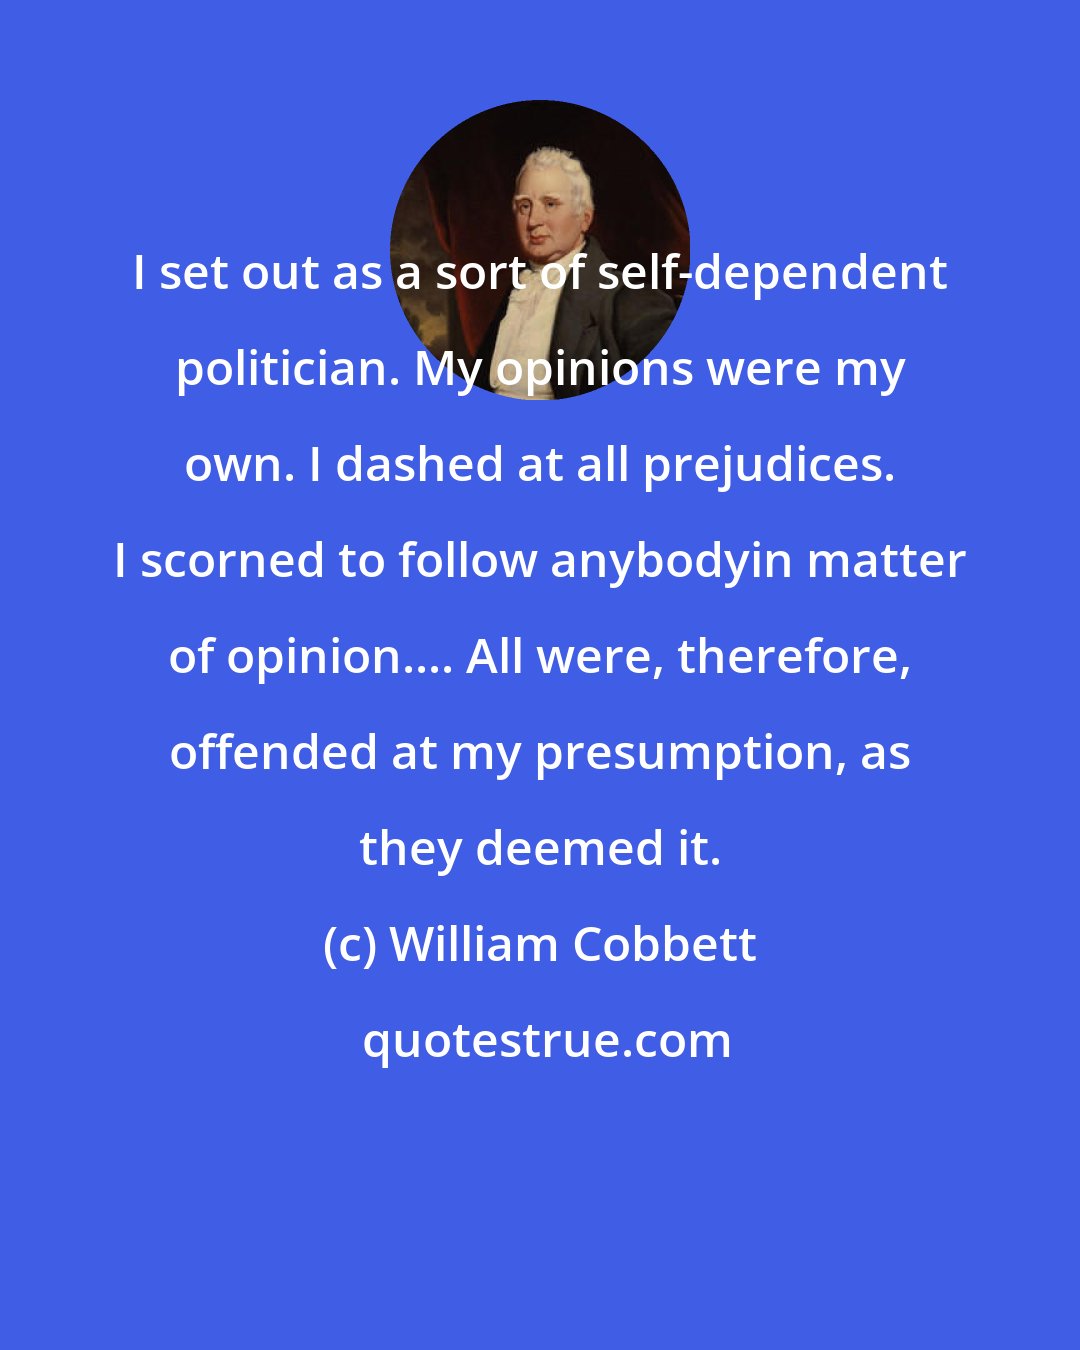 William Cobbett: I set out as a sort of self-dependent politician. My opinions were my own. I dashed at all prejudices. I scorned to follow anybodyin matter of opinion.... All were, therefore, offended at my presumption, as they deemed it.